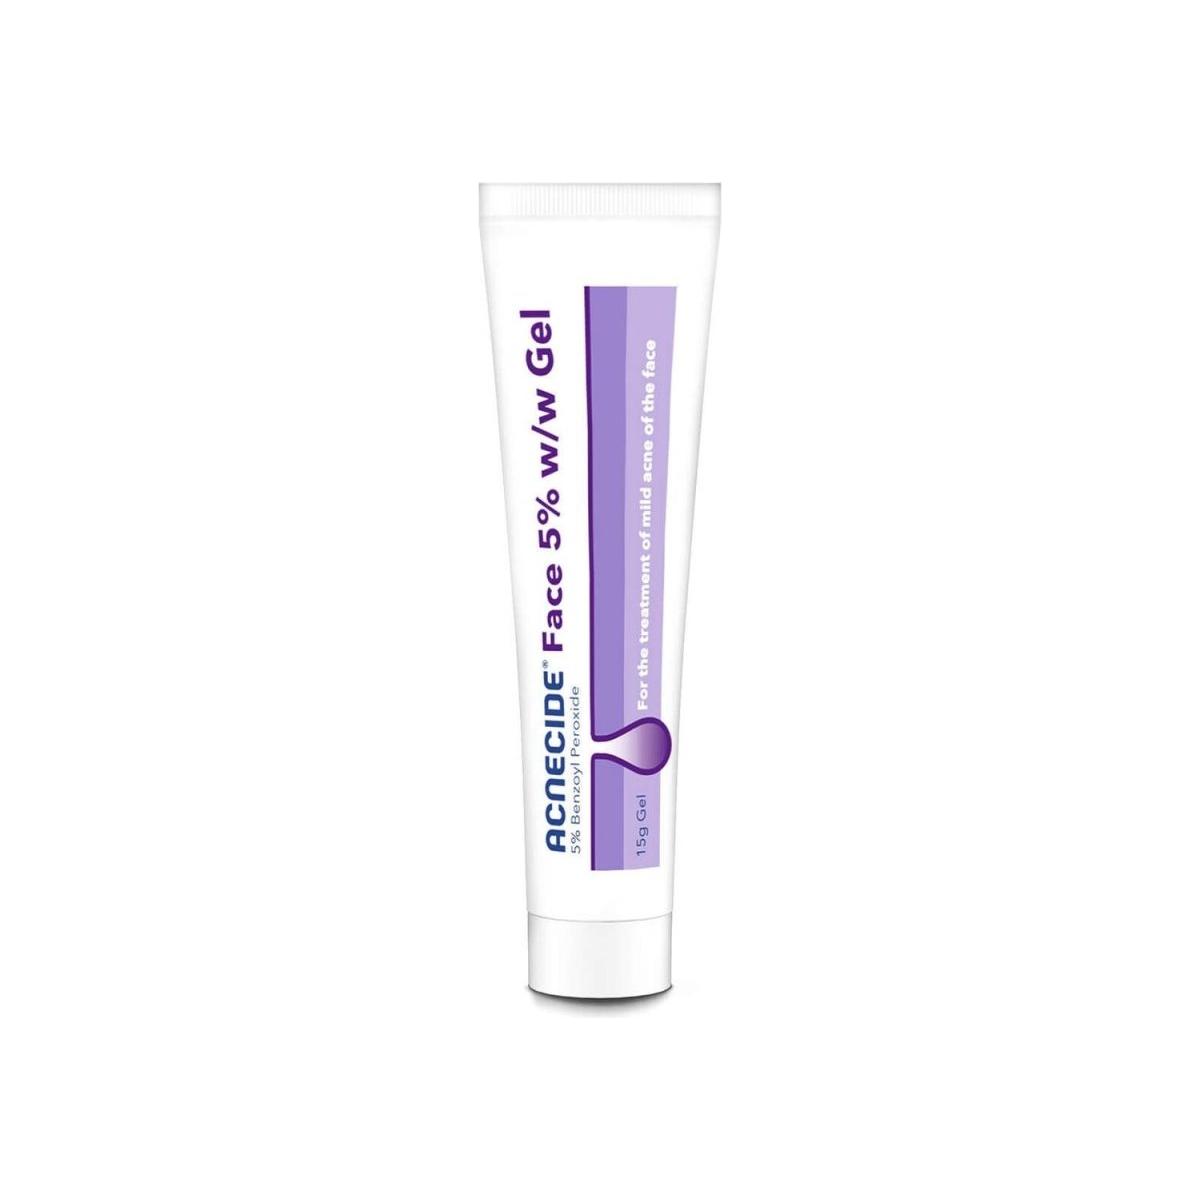 Acnecide Face Gel Spot Treatment with Benzoyl Peroxide - Glam Global UK